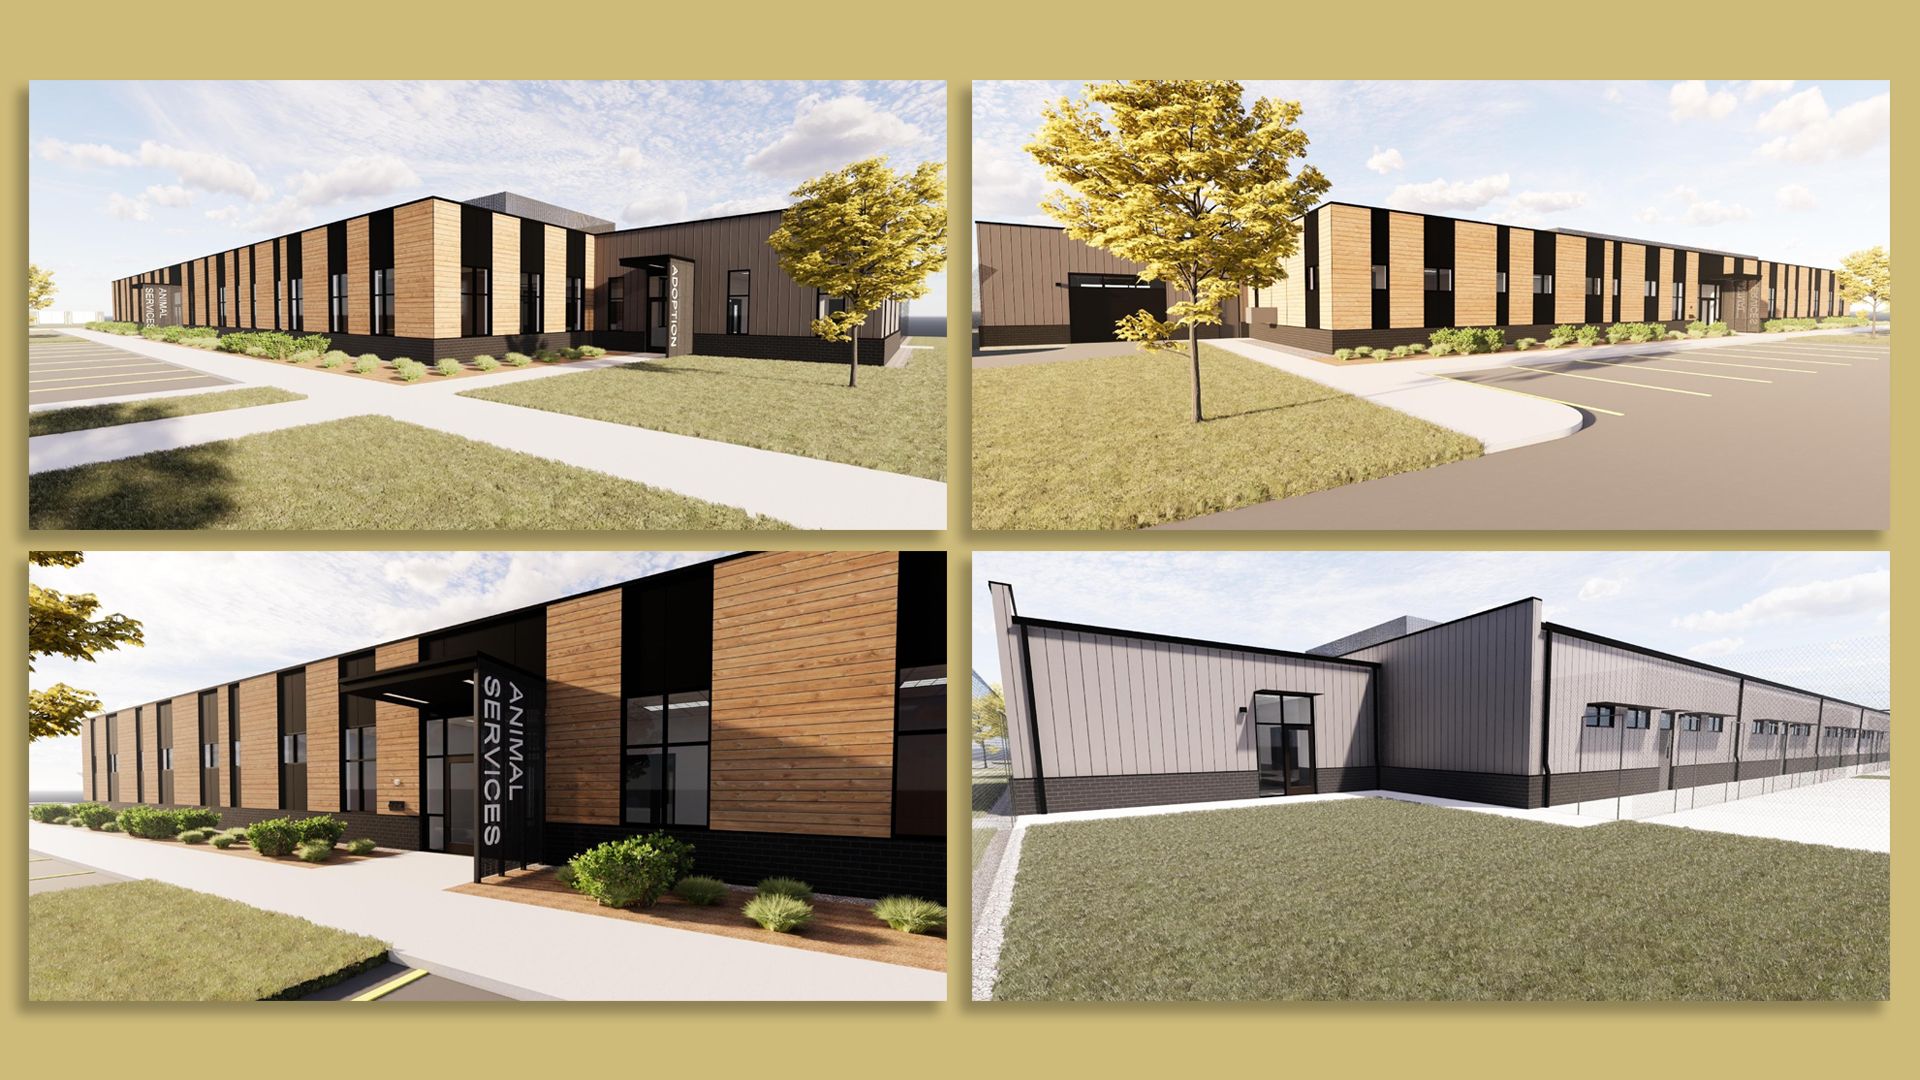 Drawing of Des Moines new animal shelter facility